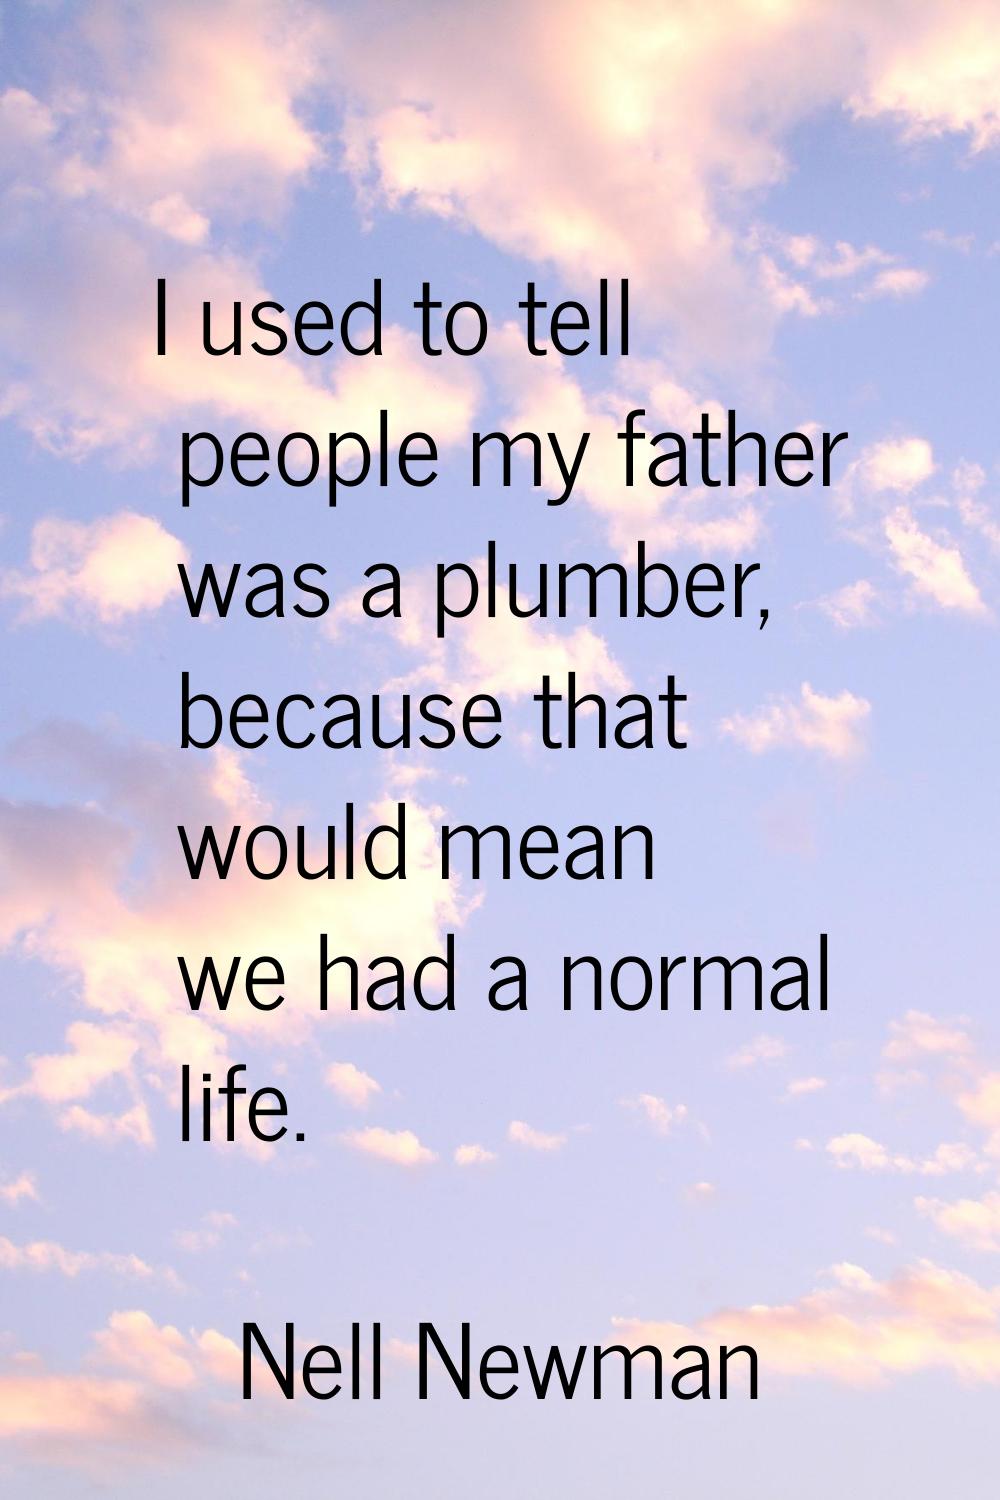 I used to tell people my father was a plumber, because that would mean we had a normal life.